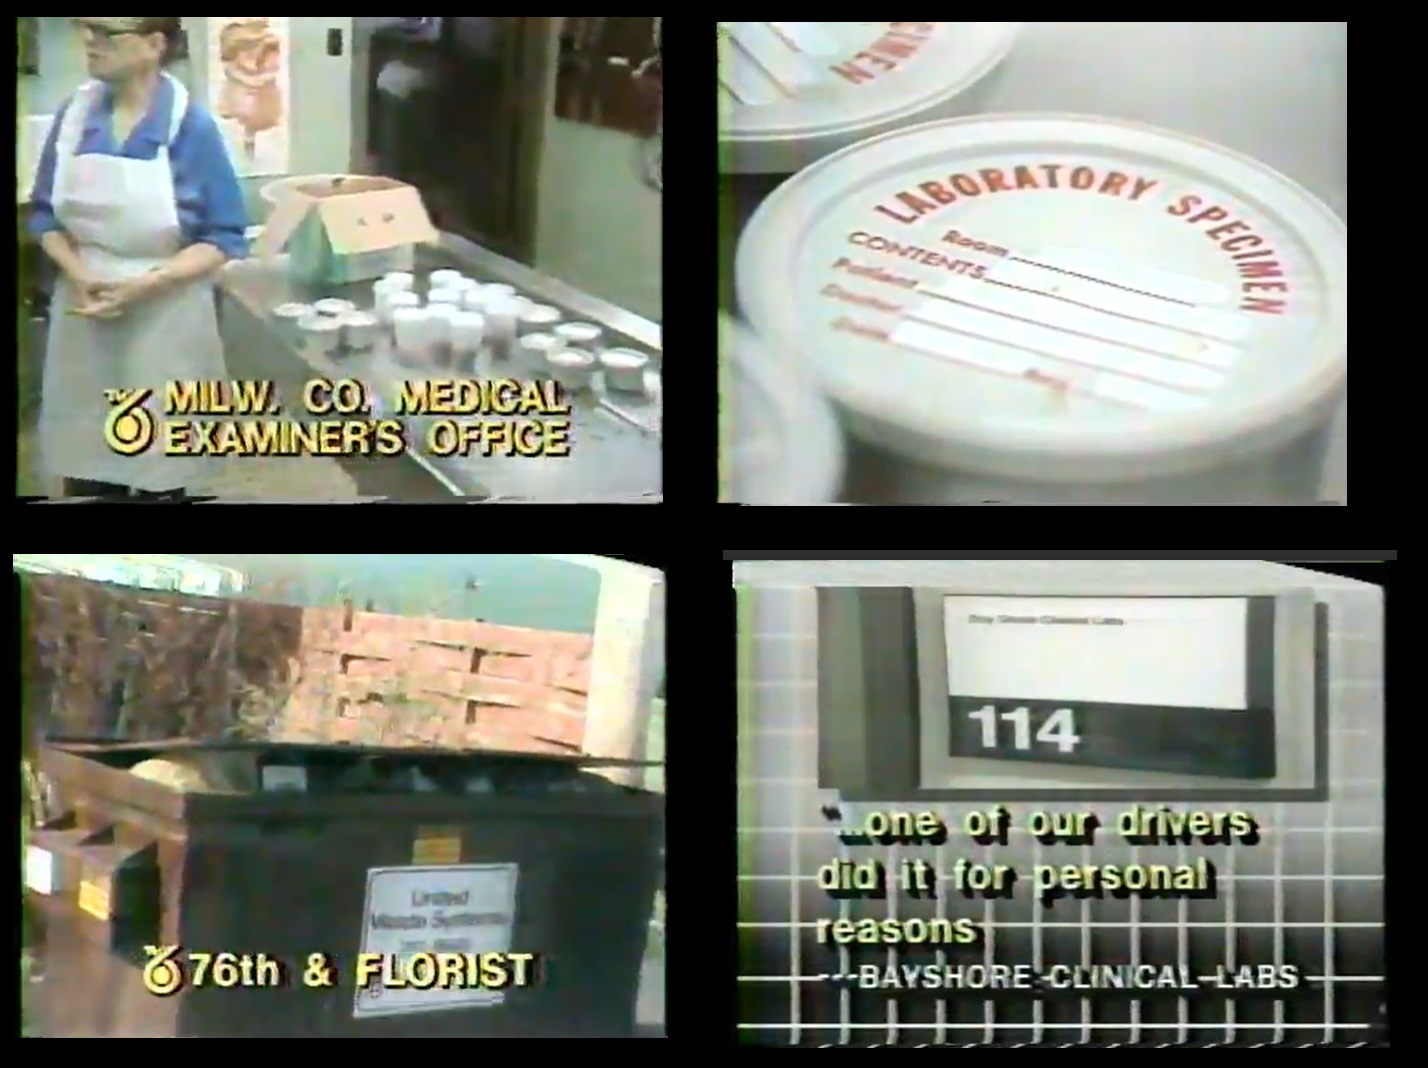 'Little people' found near dumpster turned out to be aborted fetuses (Images: TV6News Milwaukee 1984)